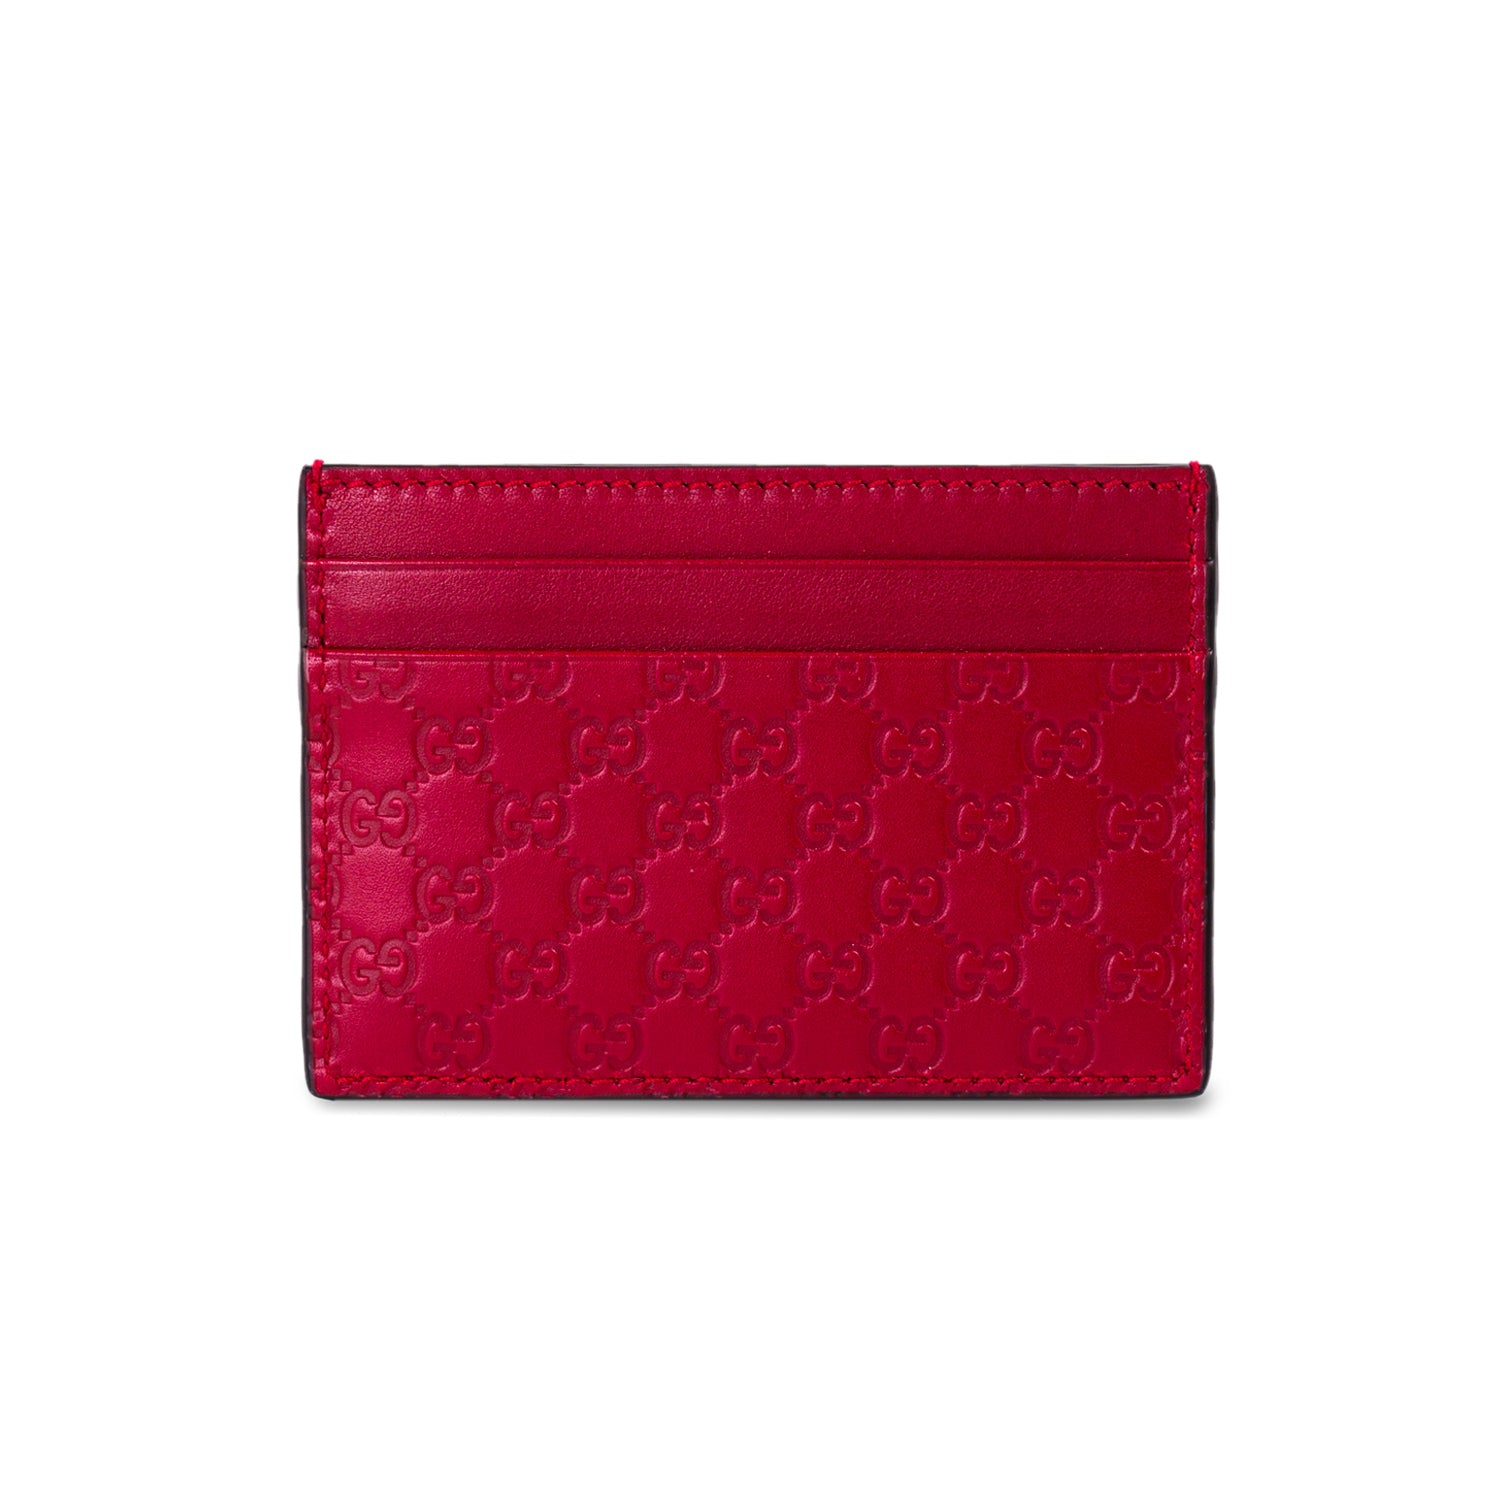 Shop authentic Gucci Guccissima Signature Card at revogue for just 175.00